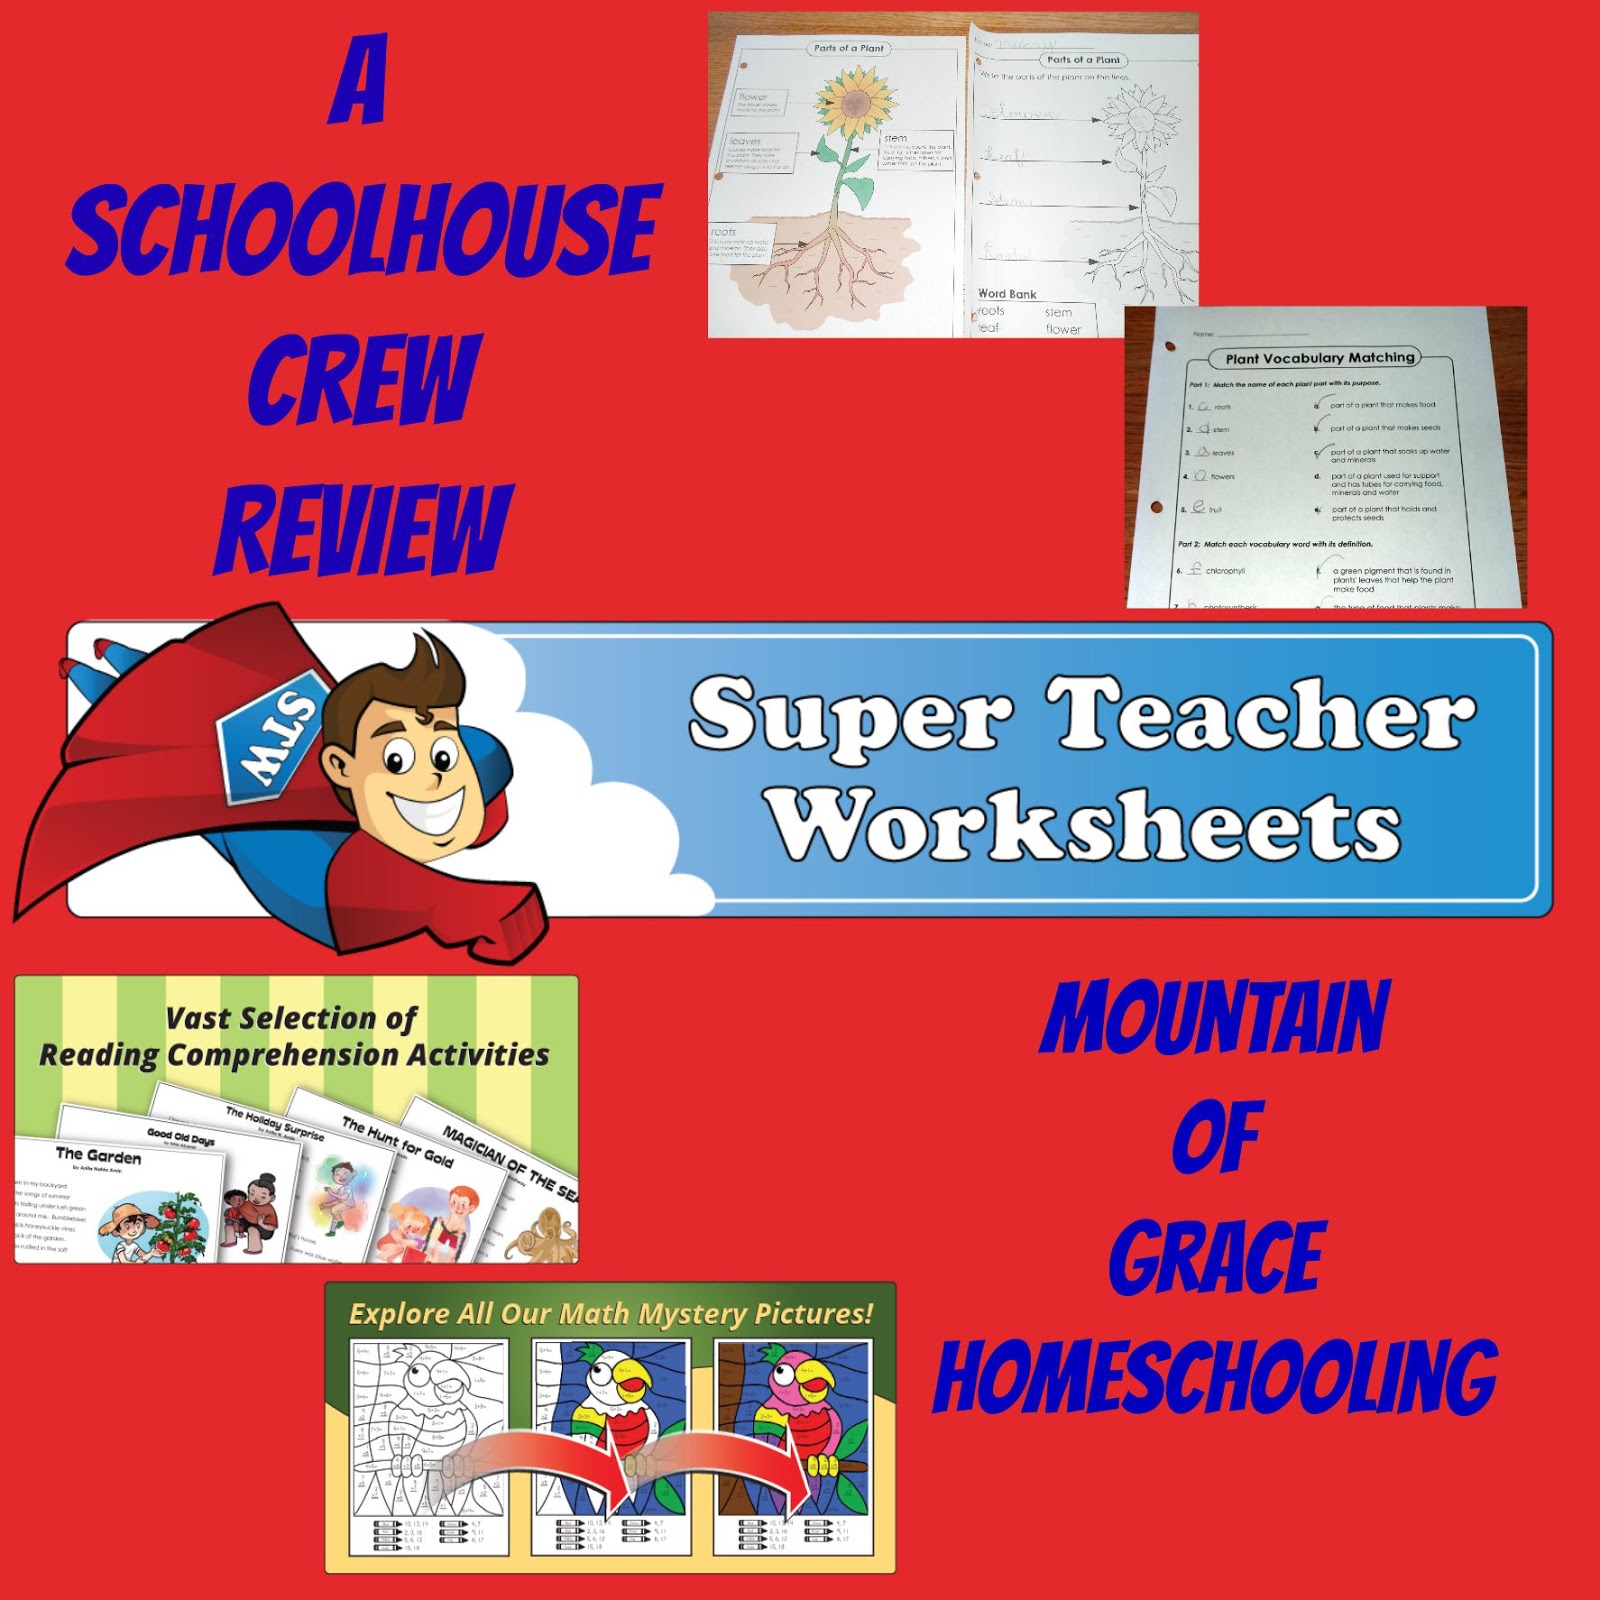 Mountain of Grace Homeschooling: TOS Review for Super ...